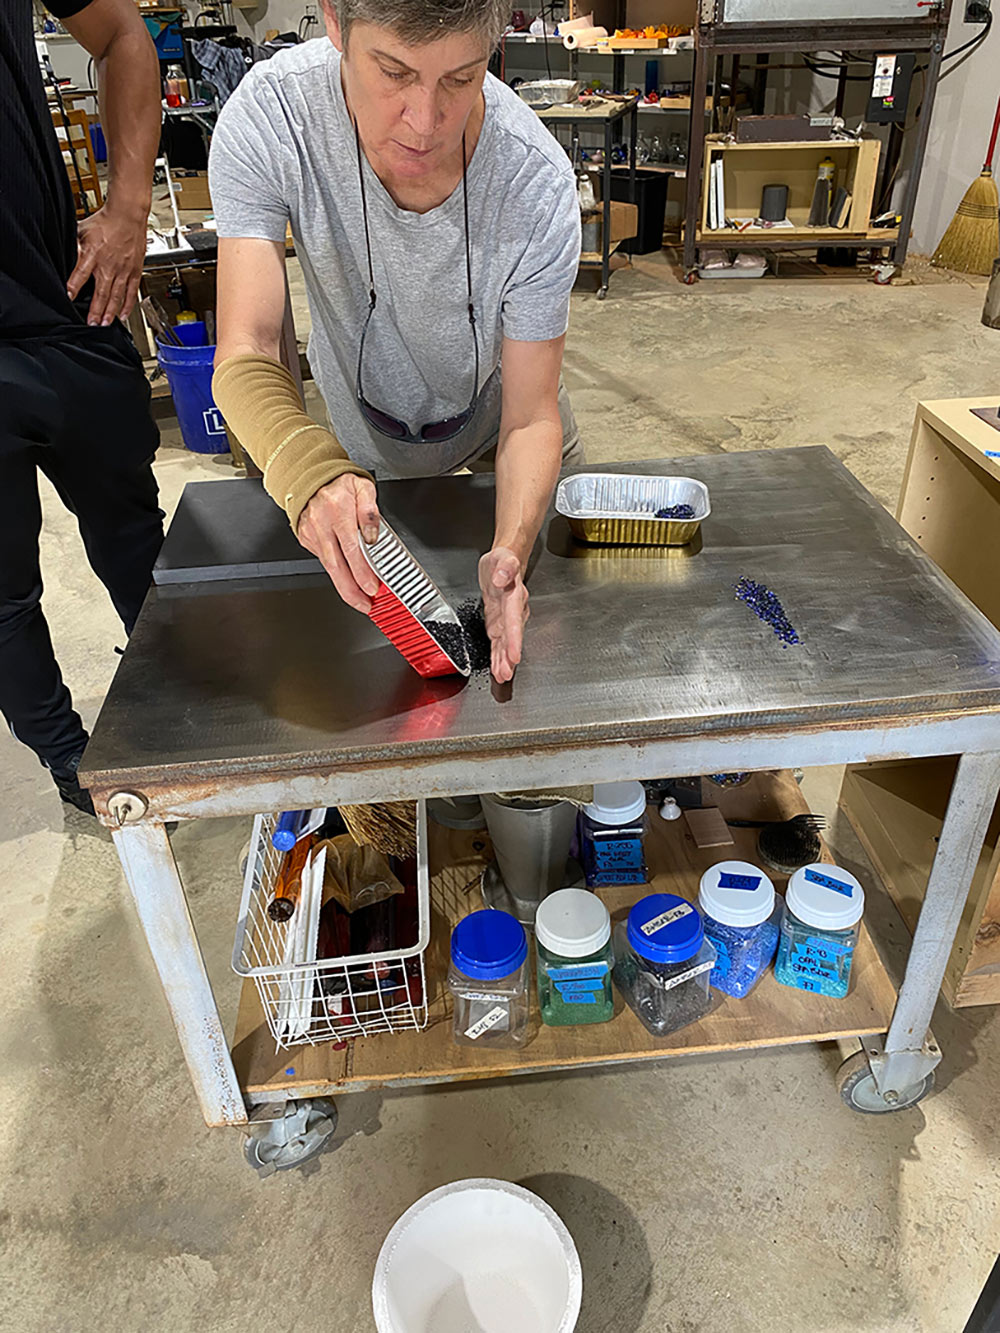 someone demonstrating with materials on metal table